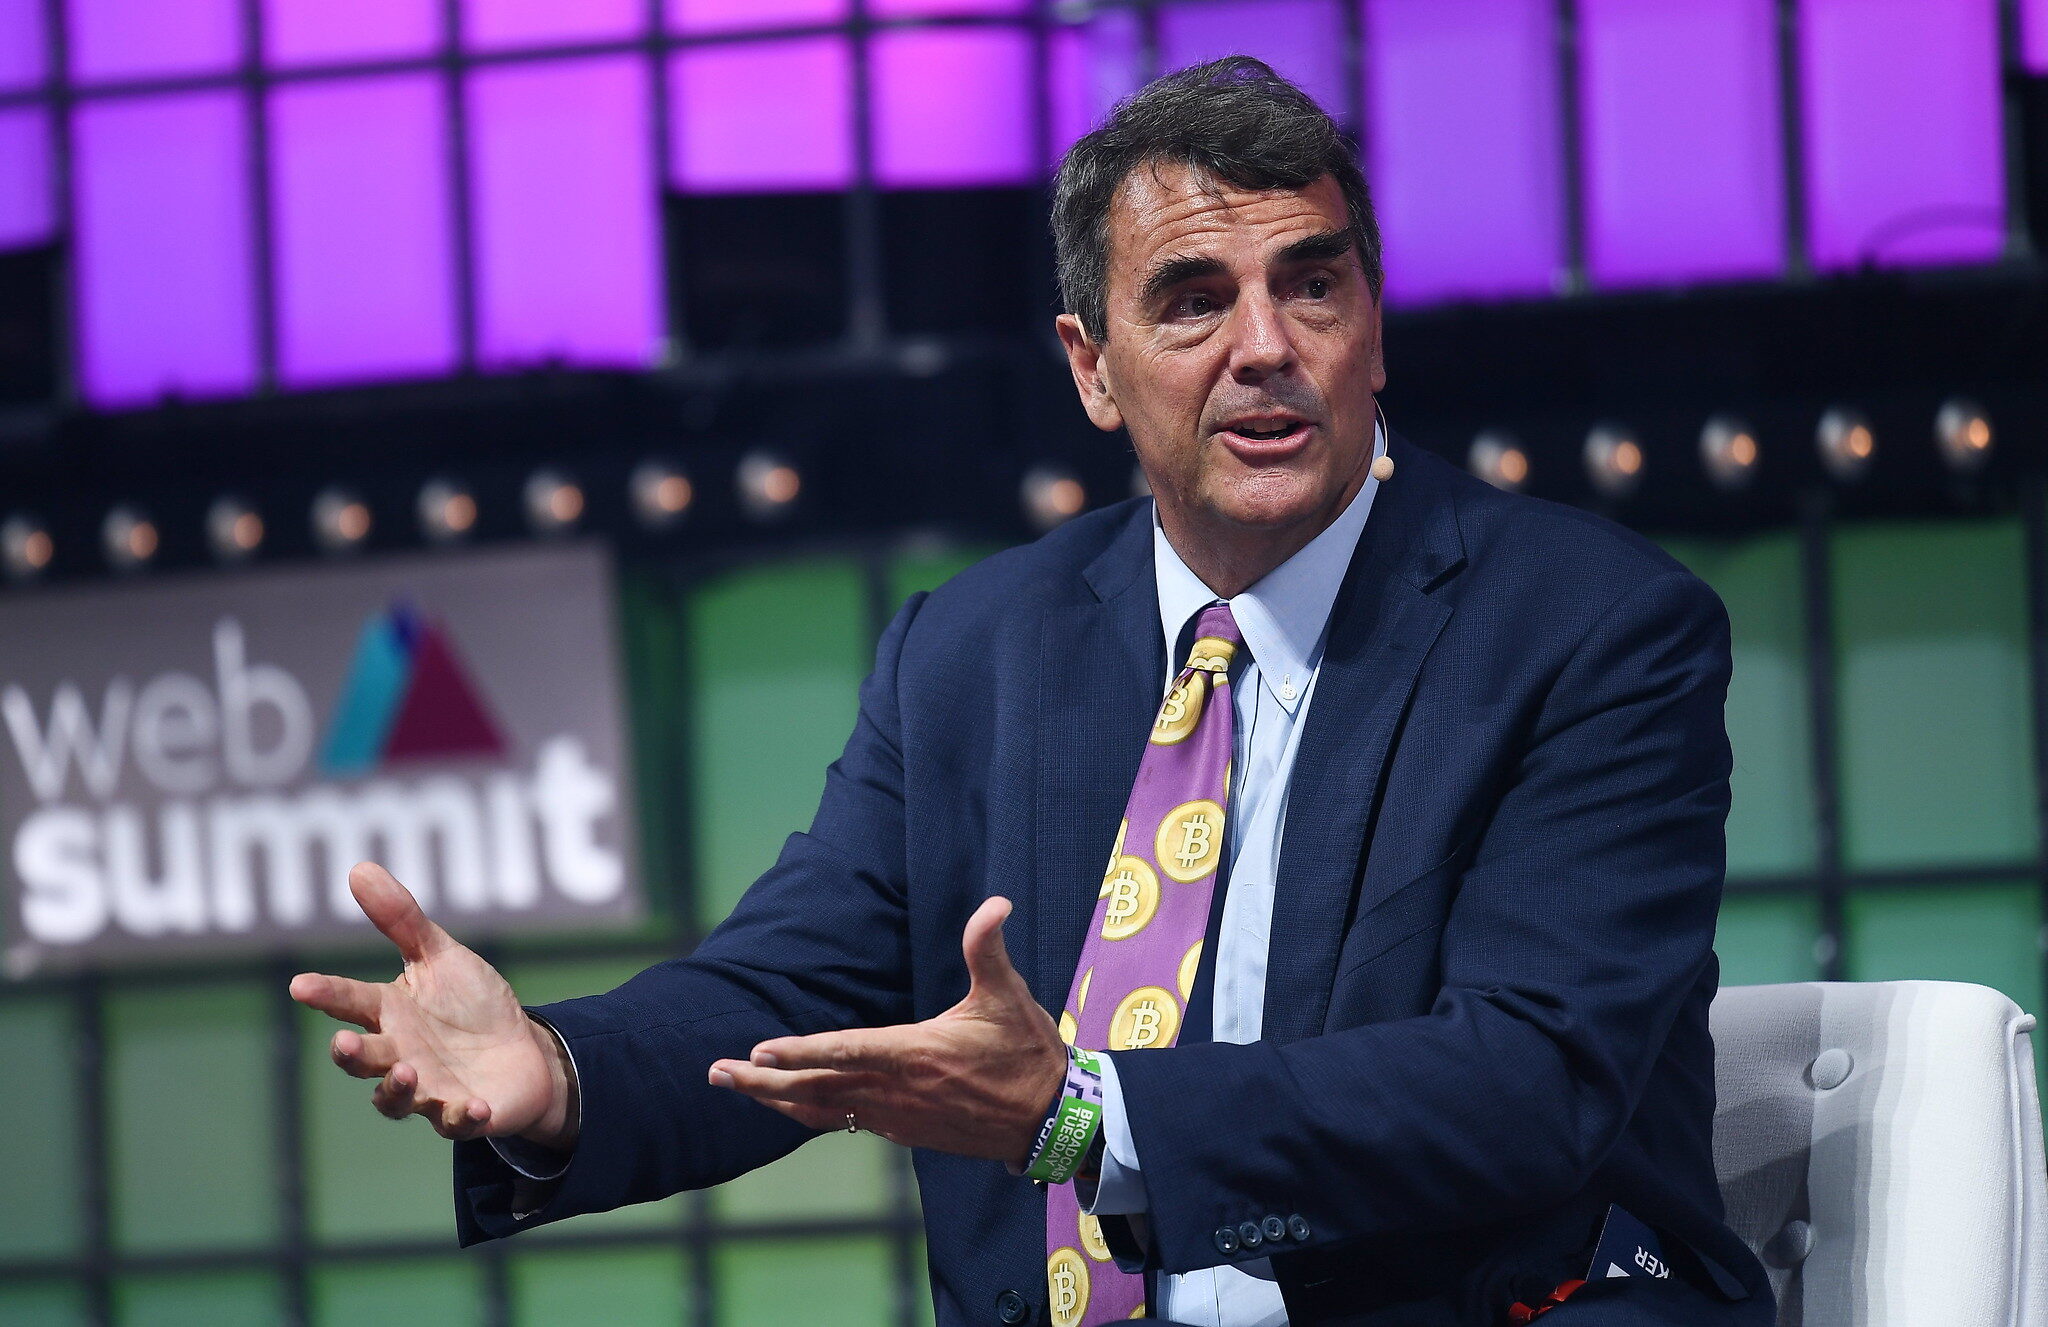 Tim Draper, Draper Associates, on Centre Stage during day one of Web Summit 2021